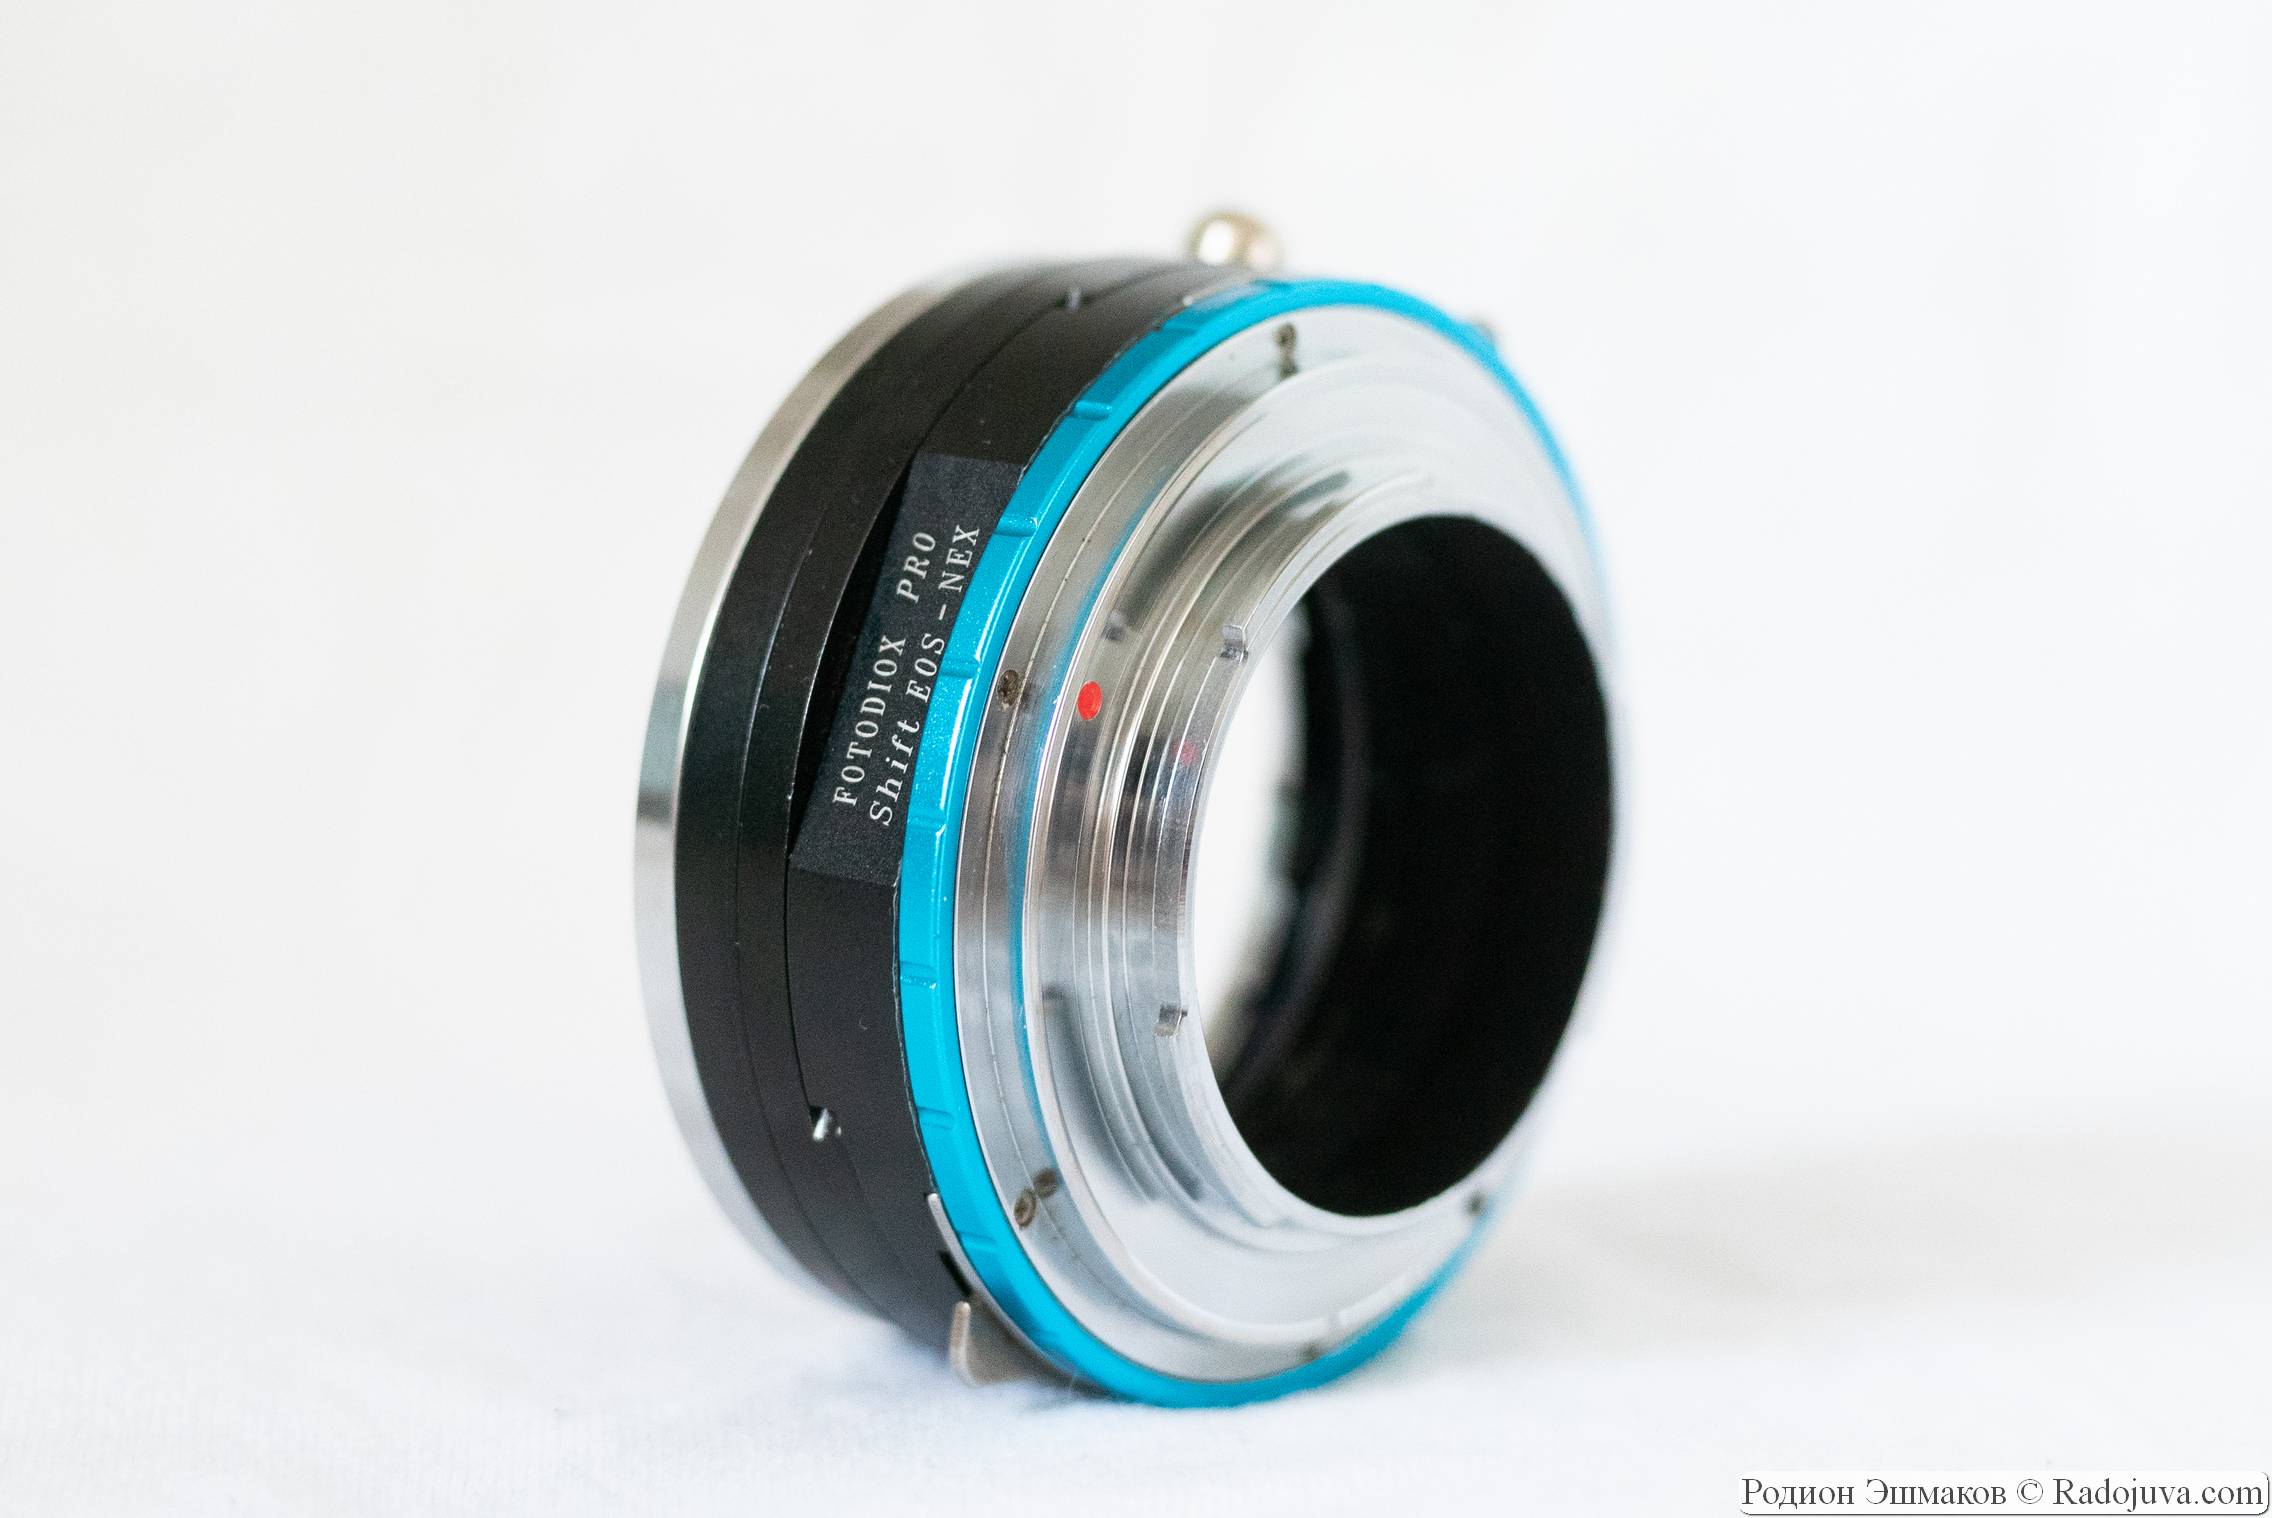 View of the Fotodiox Pro Shift EOS-NEX adapter from the side of the E mount.